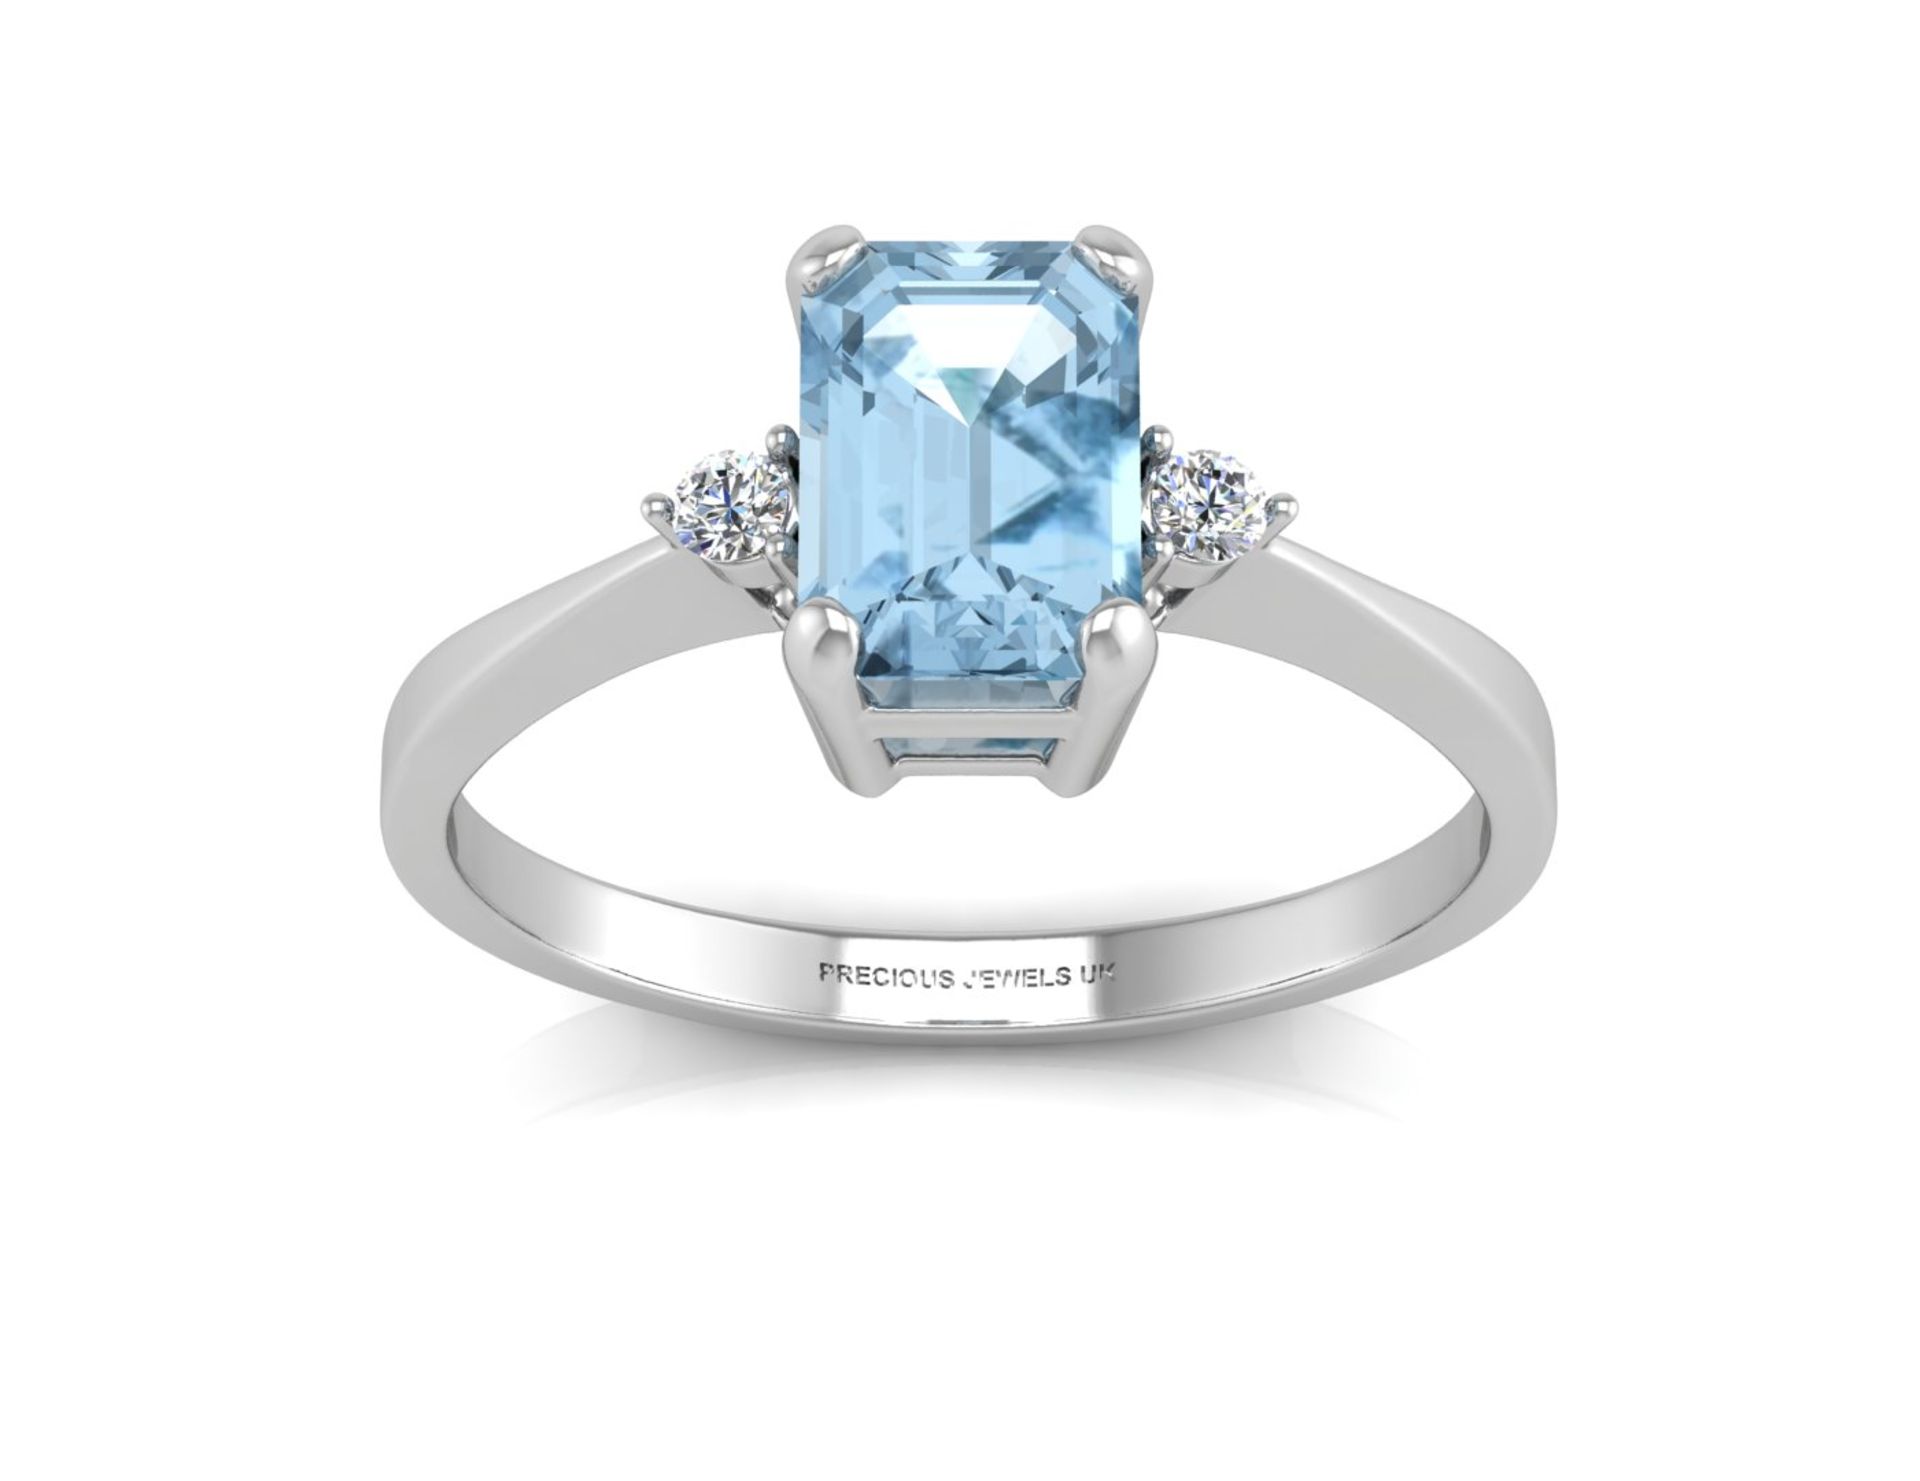 9ct White Gold Diamond And Emerald Cut Blue Topaz Ring 0.04 Carats - Valued by GIE £1,245.00 - An - Image 3 of 5